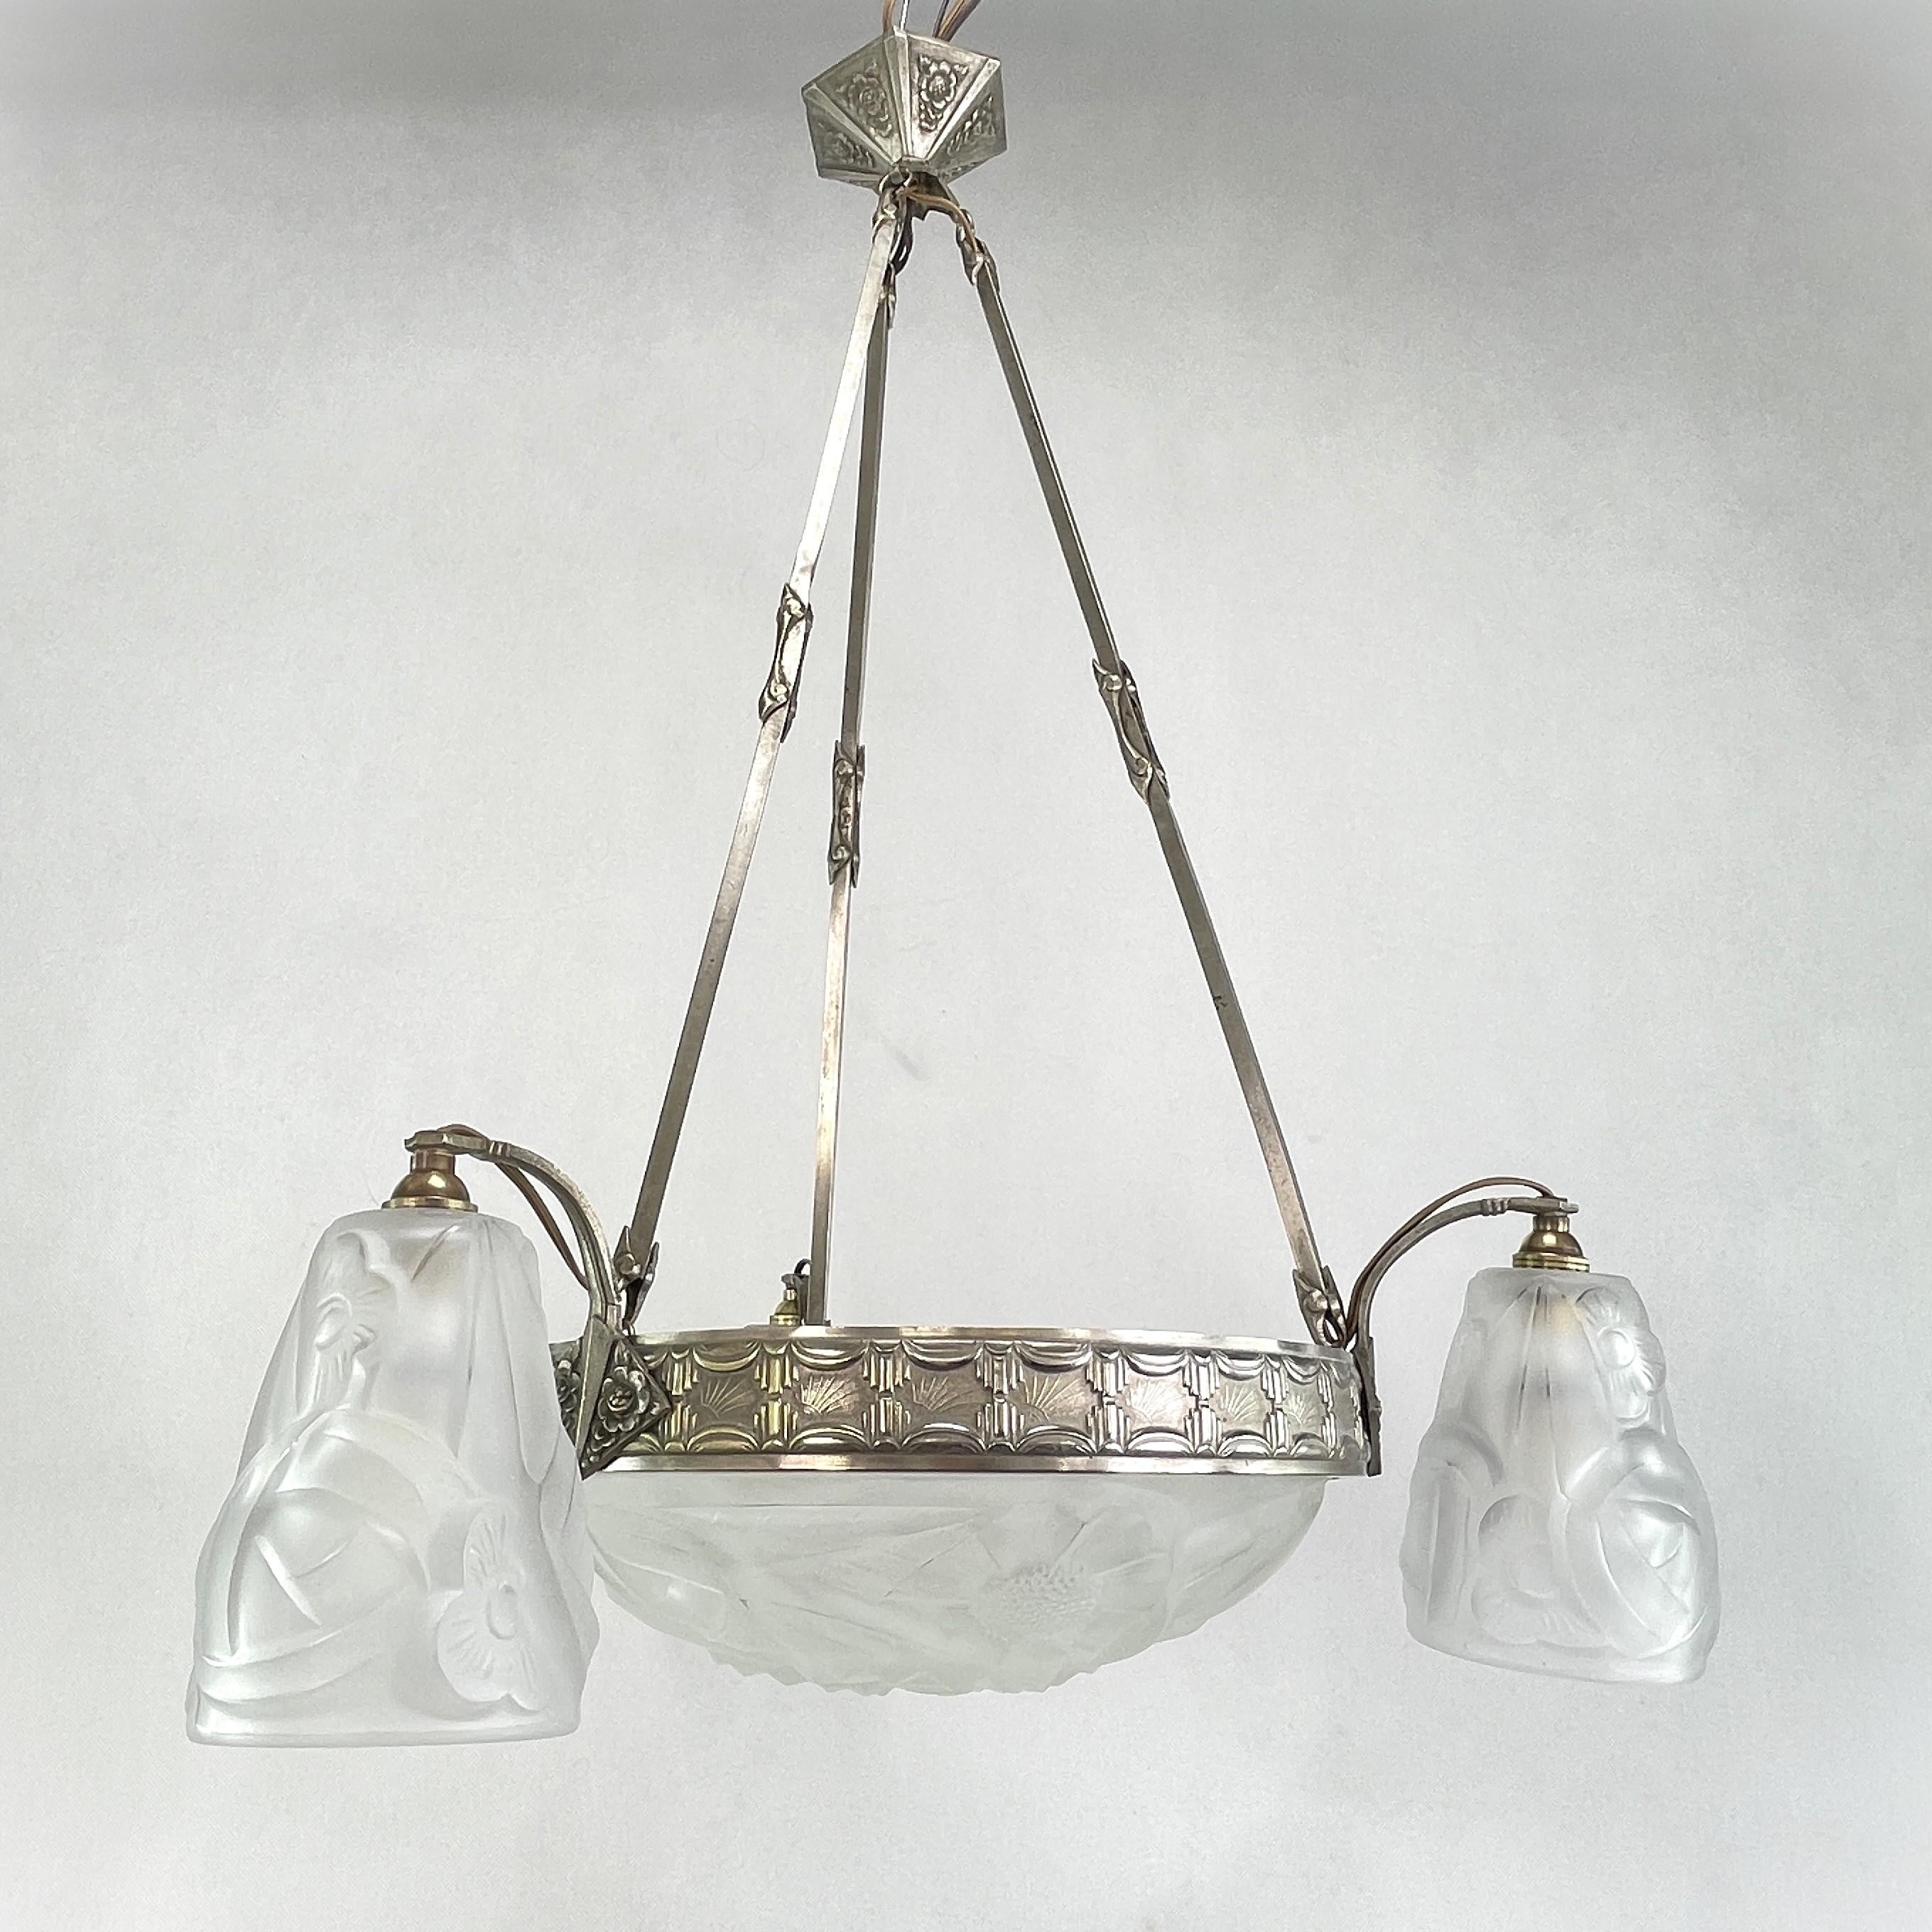 French Art Deco Chandelier Hanging Lamp by Dégue, 1930s